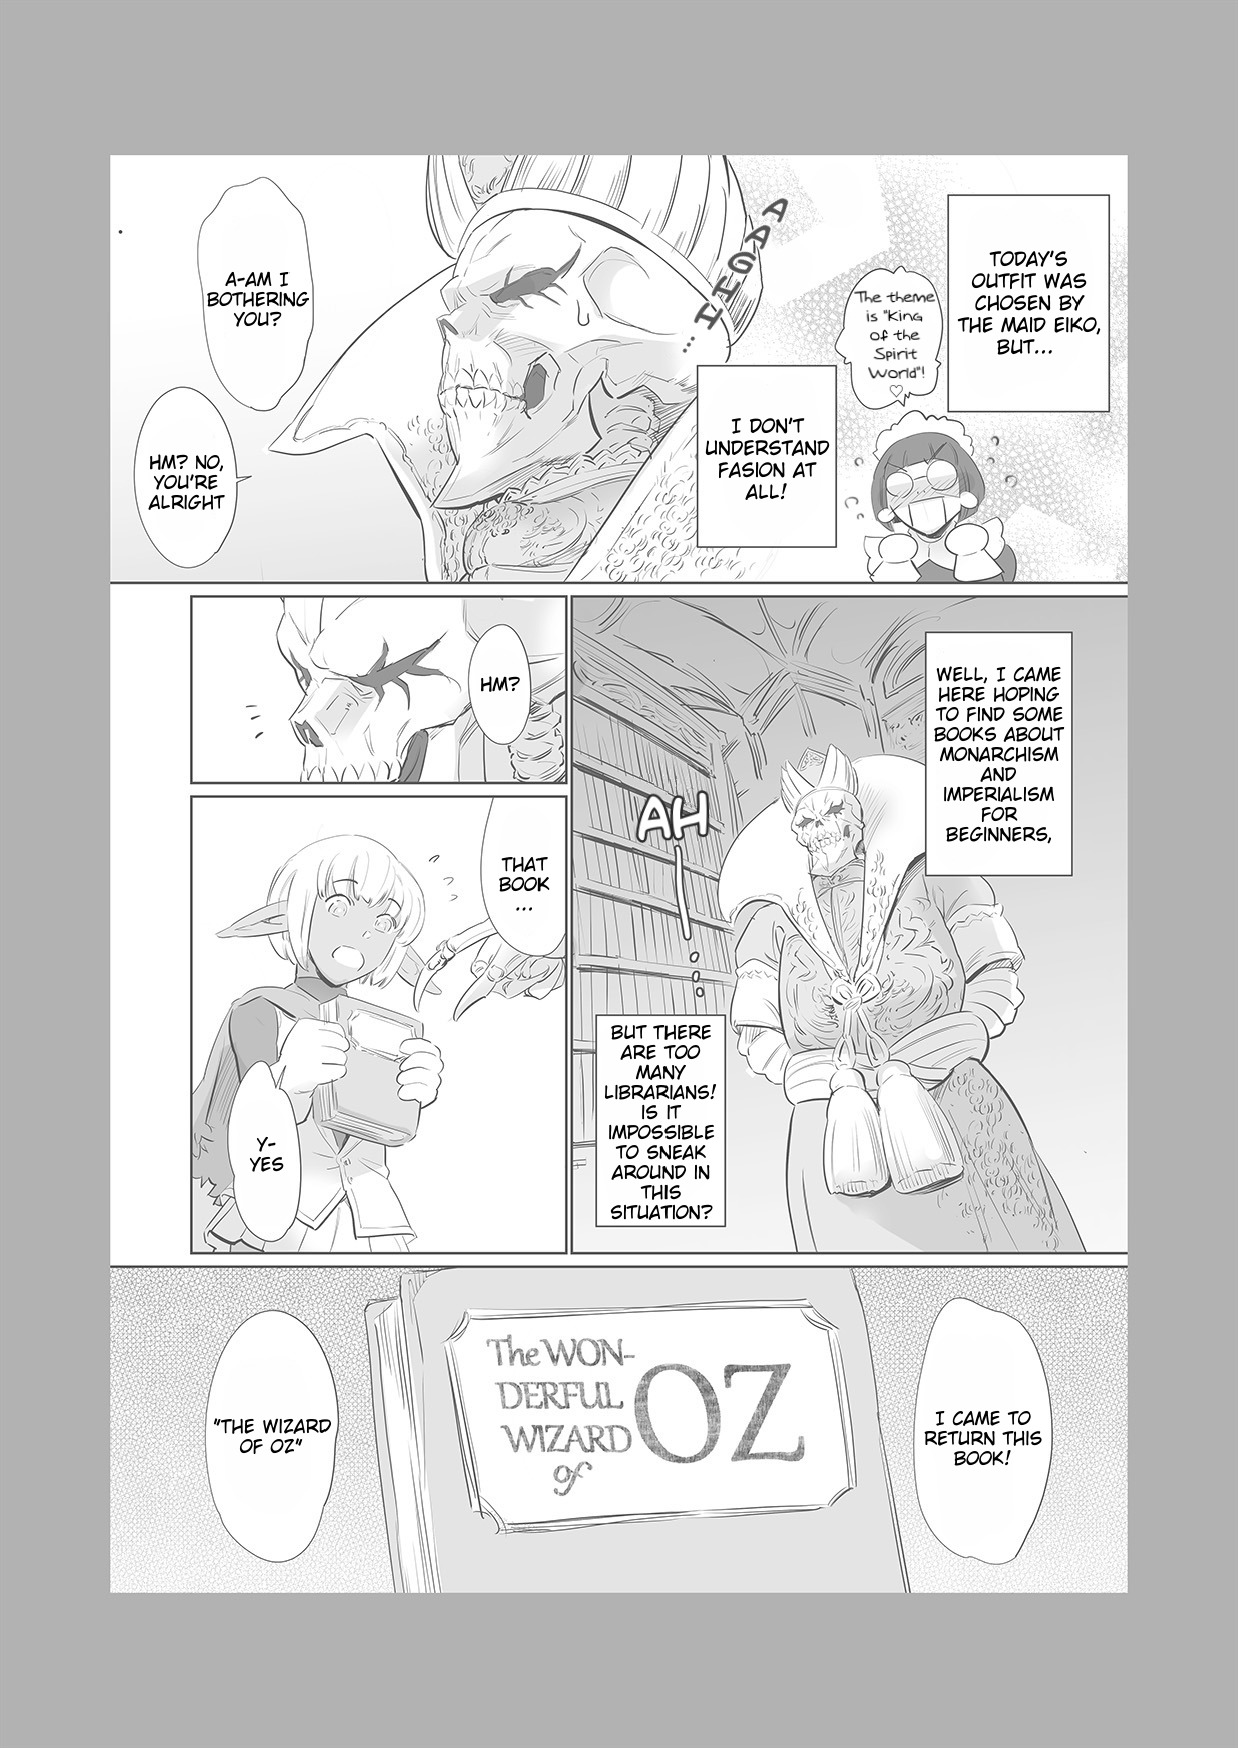 Overlord - The Wonderful Wizard of Nazarick (Doujinshi) vol.1 ch.1